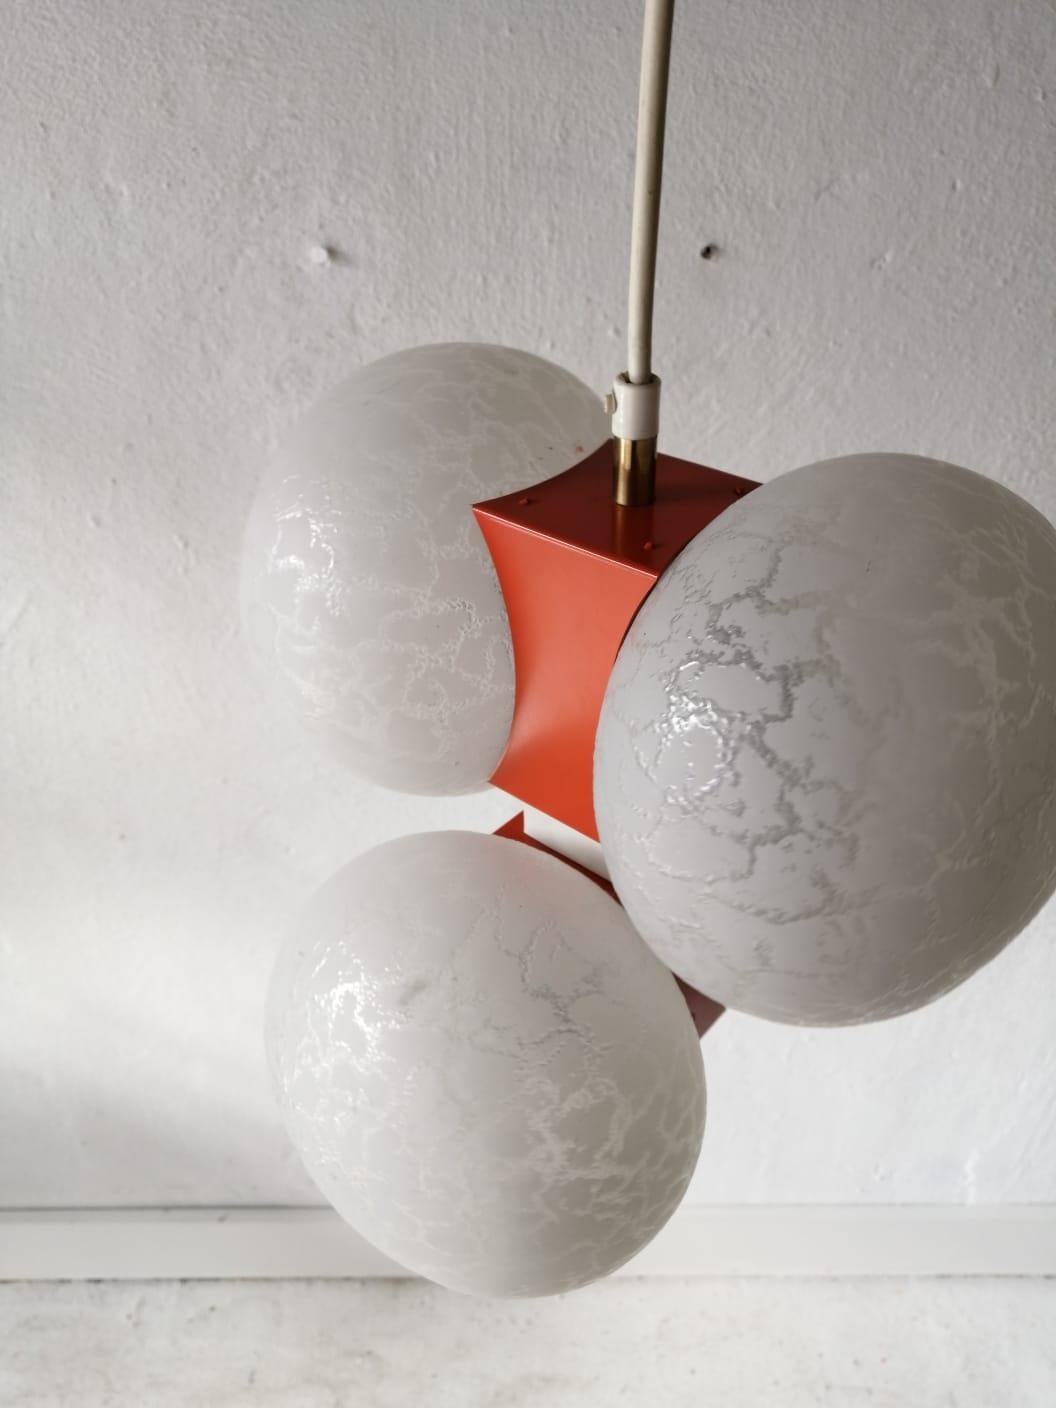 Late 20th Century 4 Amorphous Glass & Orange Metal Chandelier by Moderne Leuchten, 1970s Germany For Sale